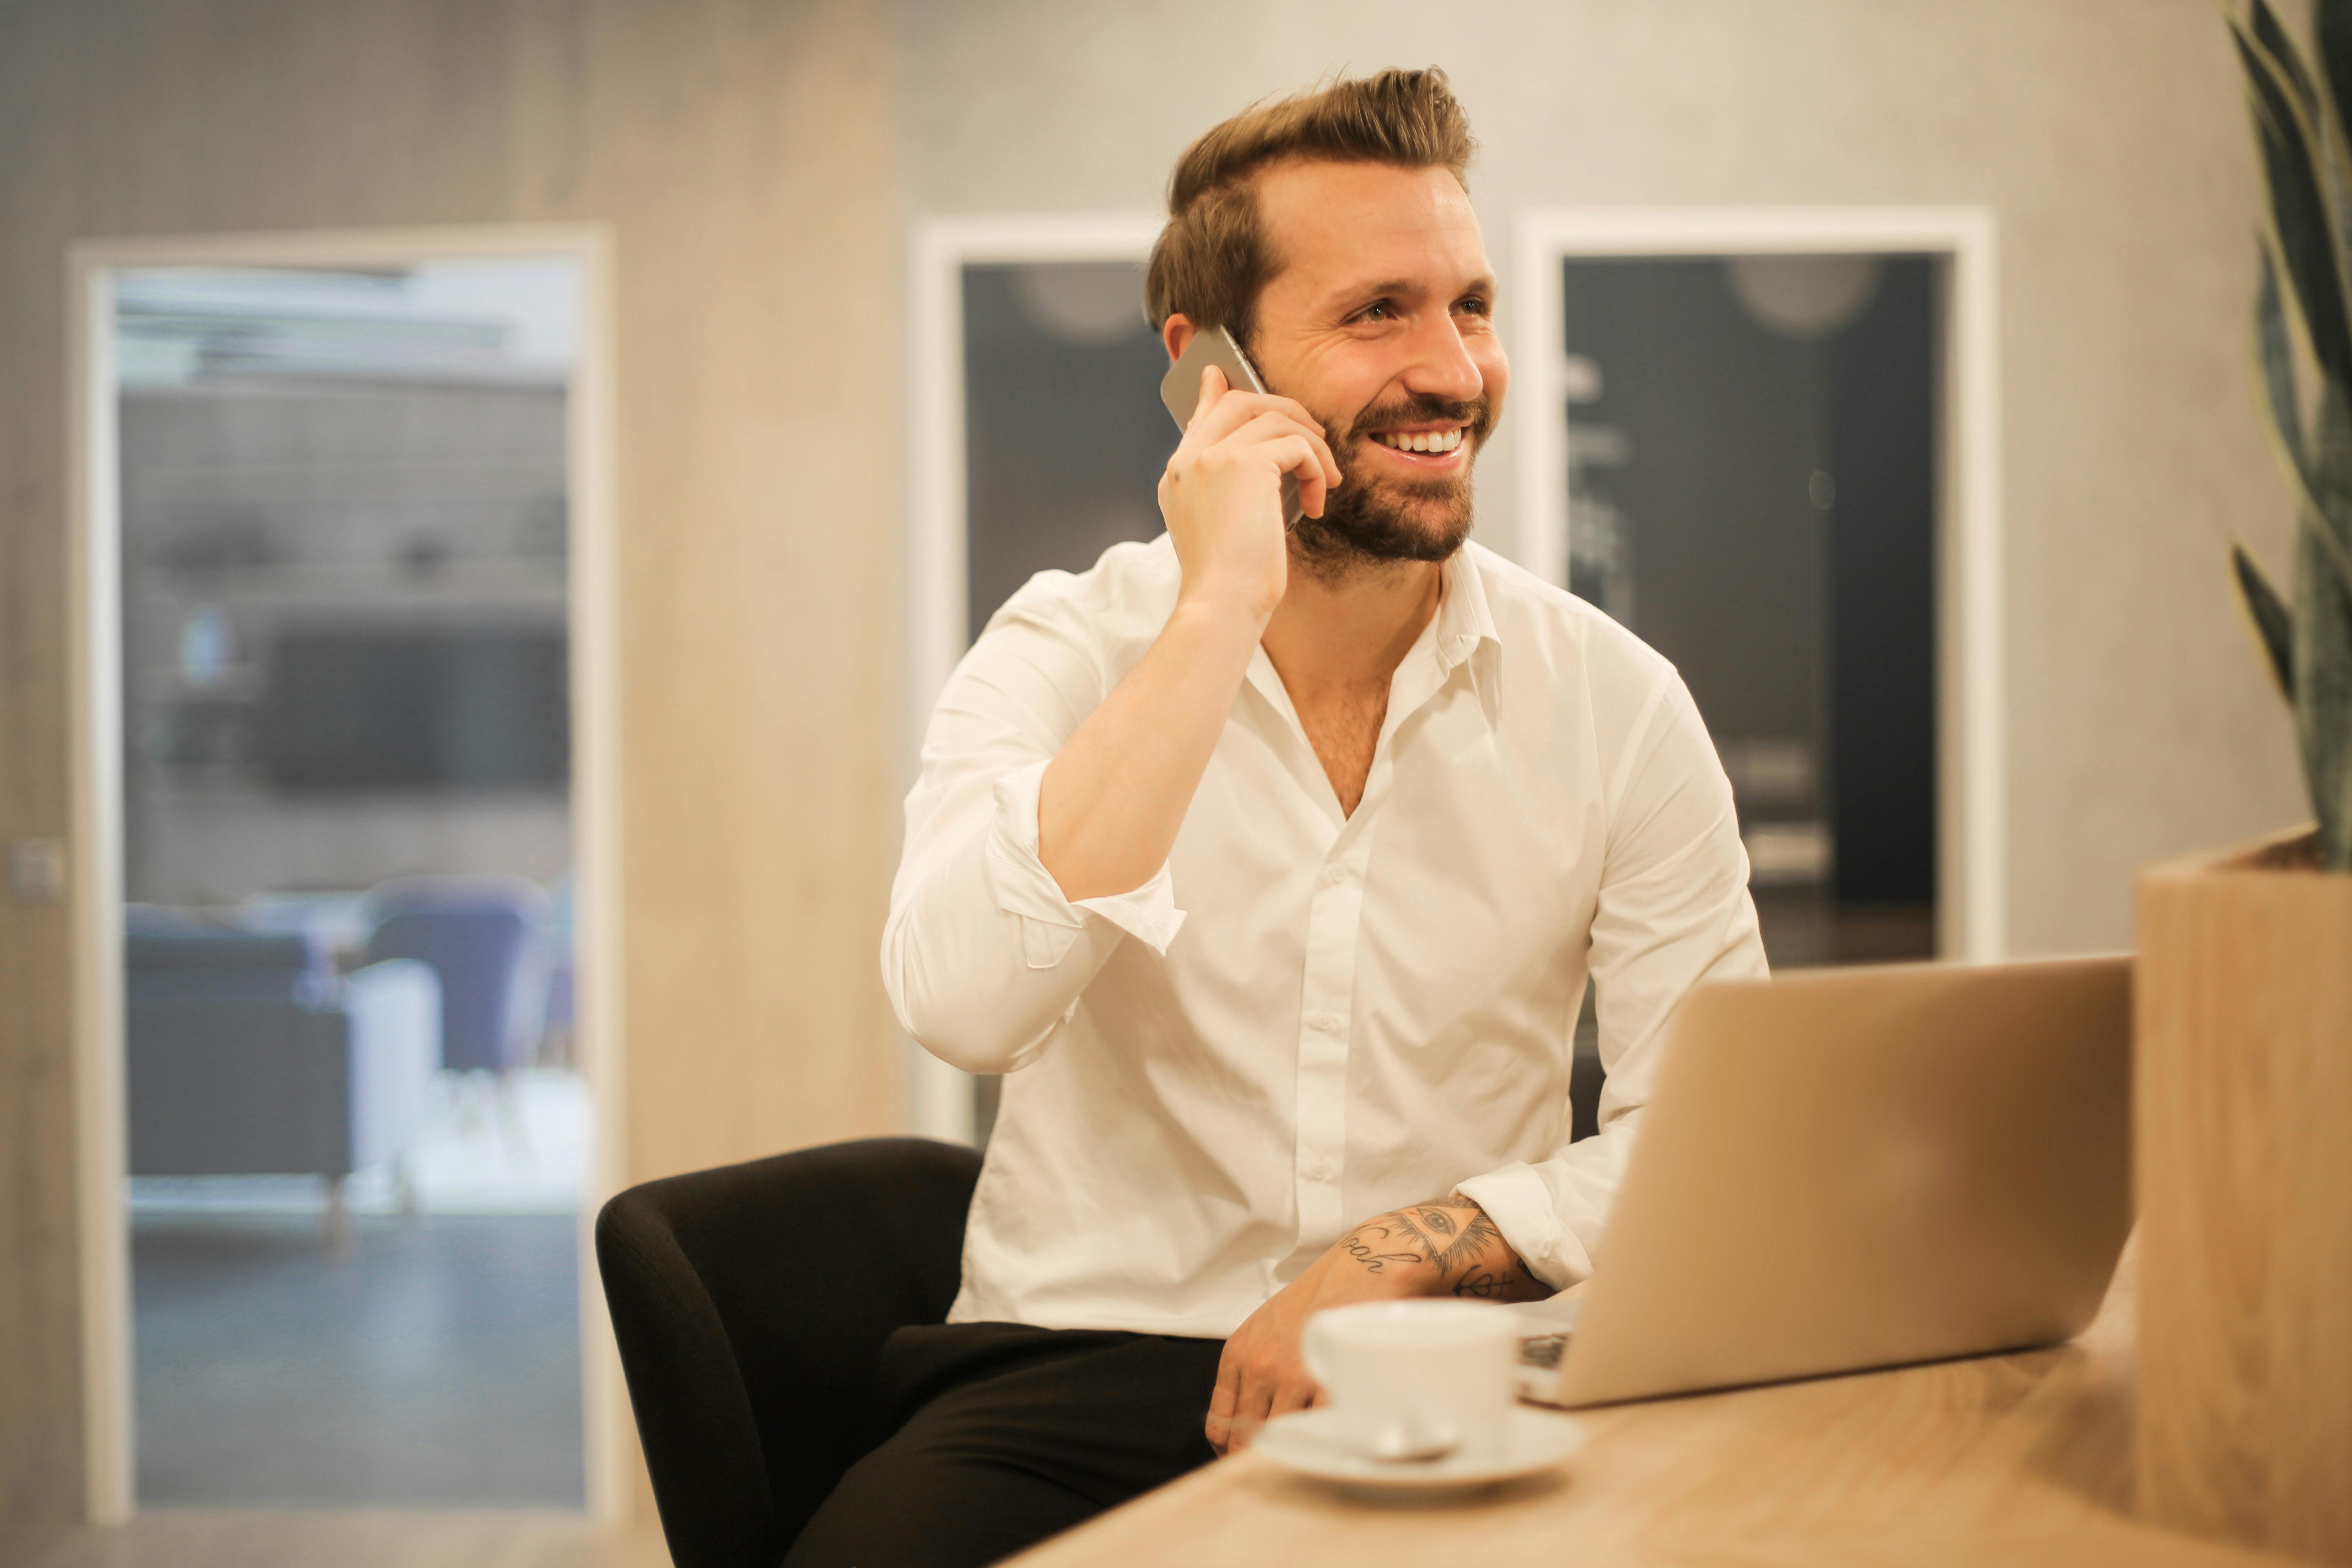 A smiling man on a call | Source: Pexels